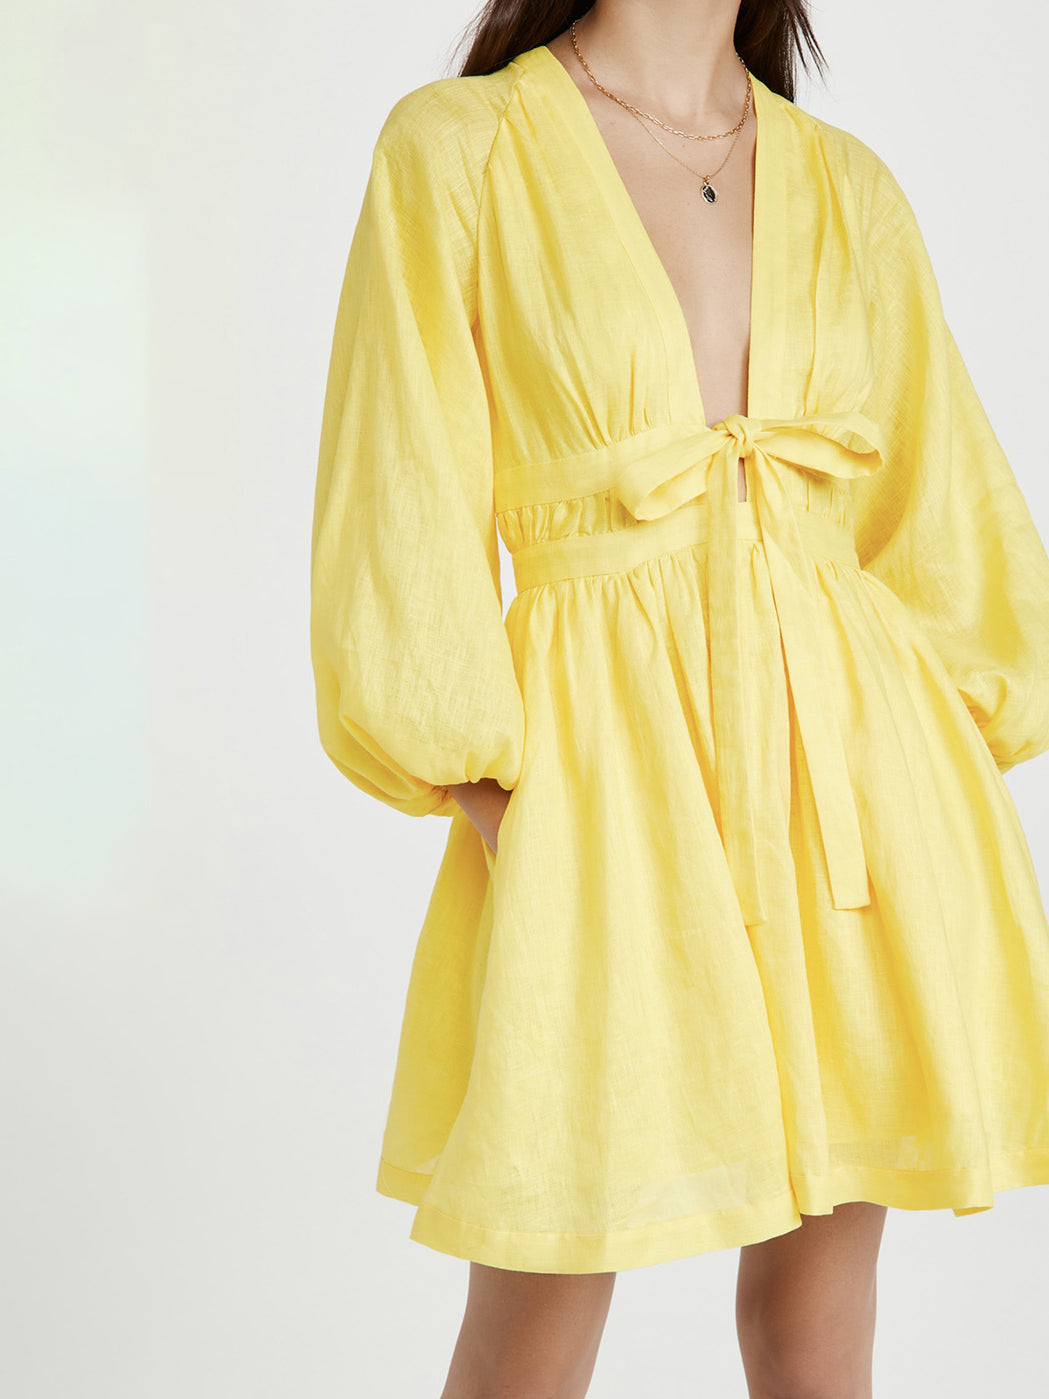 CM-D080413 Women Casual Seoul Style Solid Deep V-Neck Tie Wrap Dress - Yellow